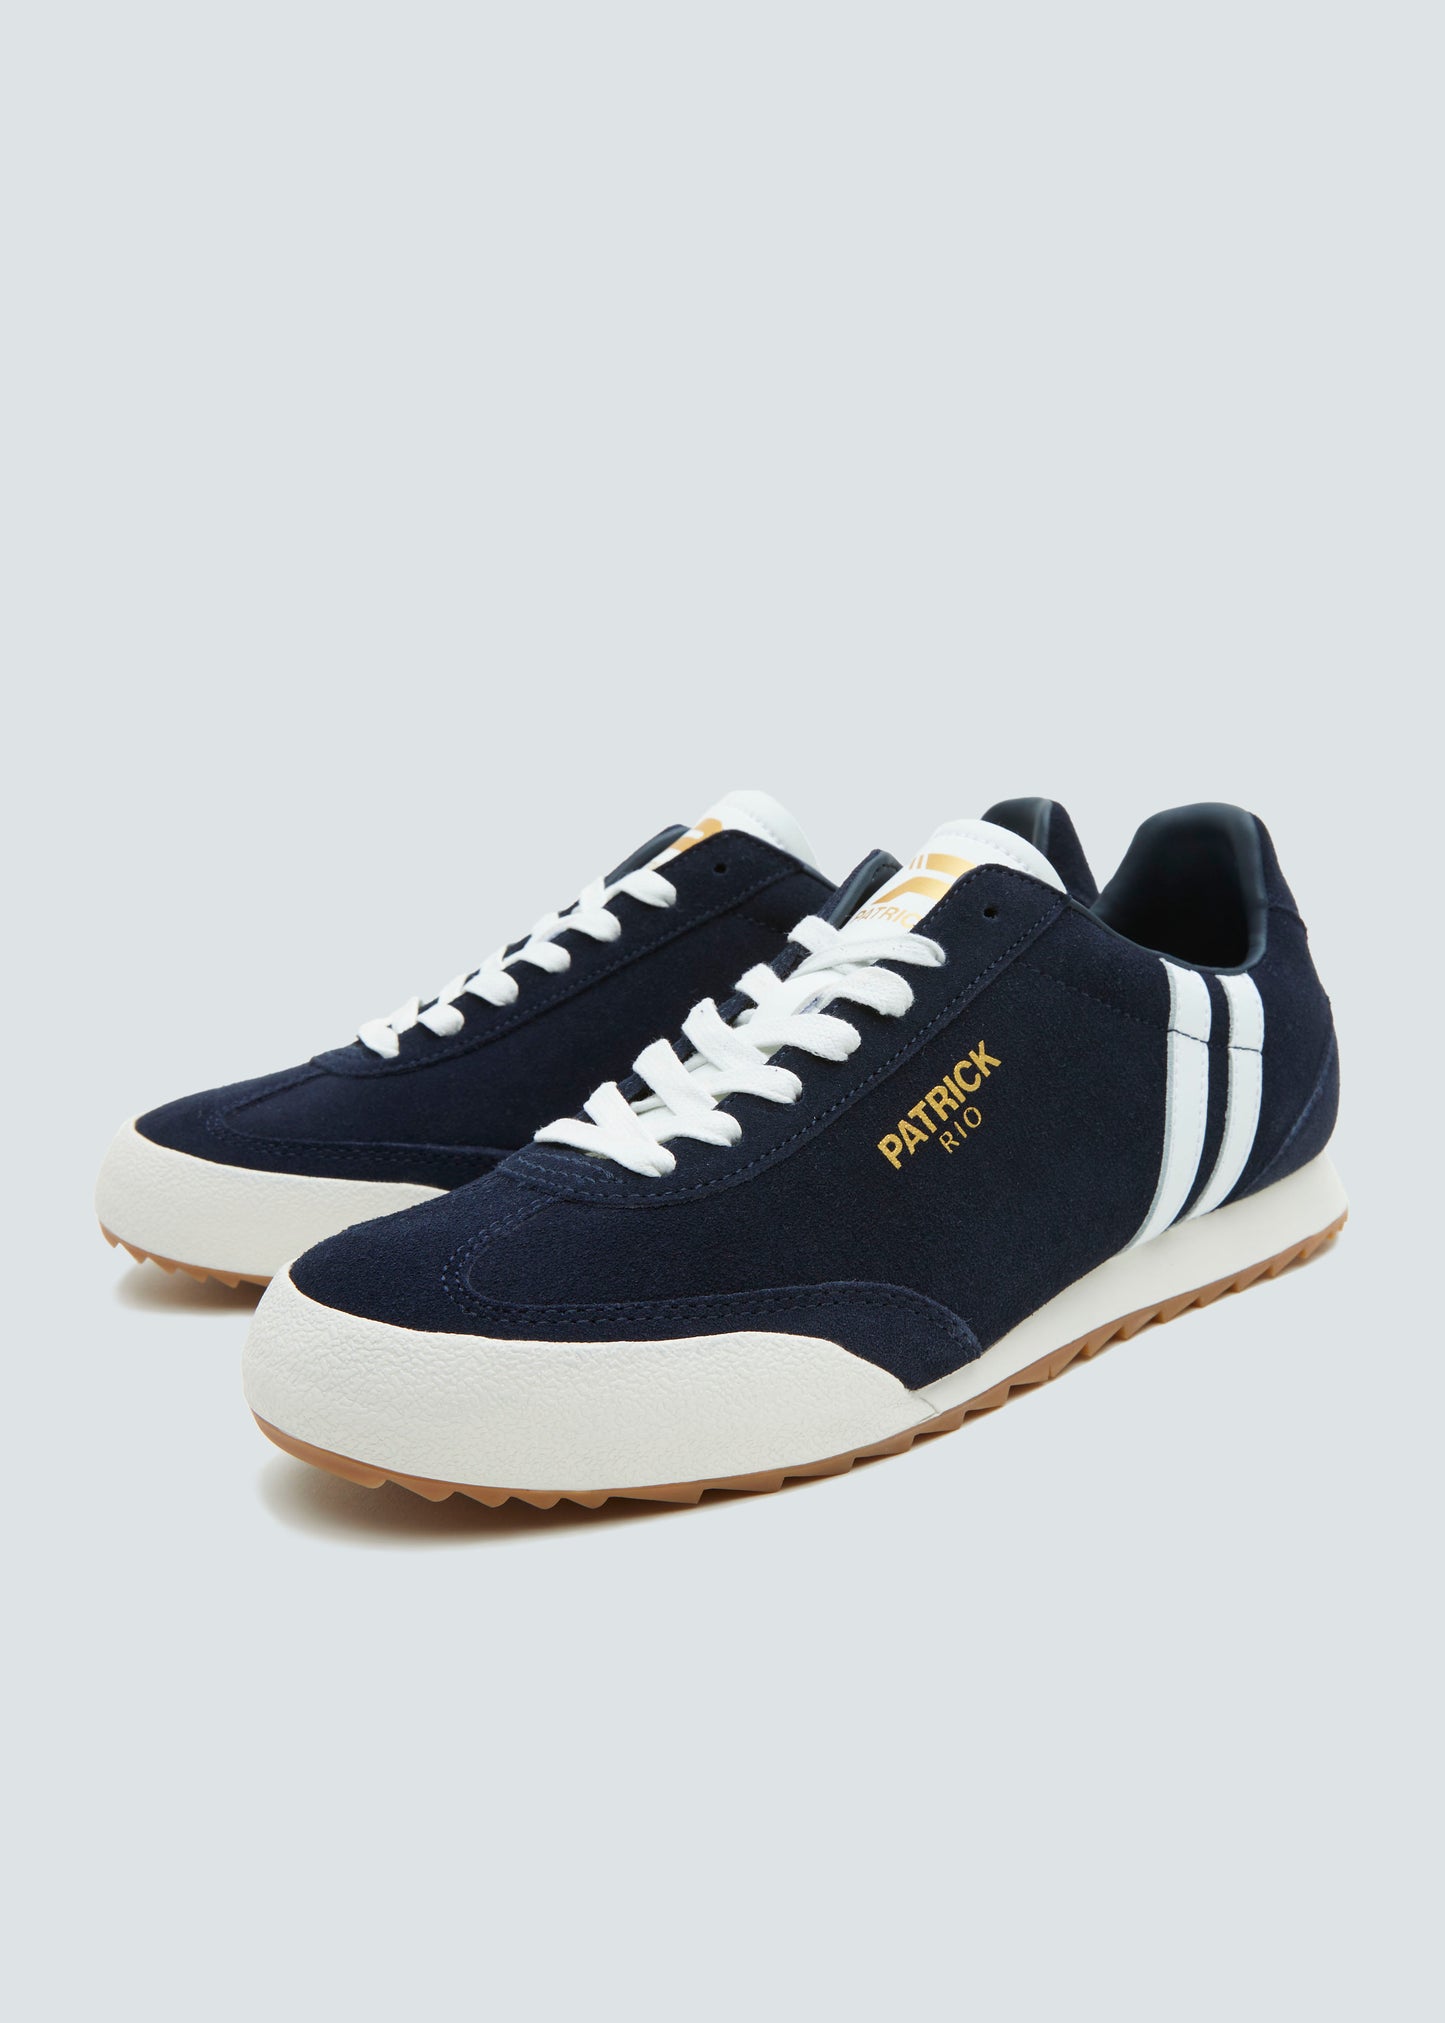 Patrick Rio Trainer - Navy - Front